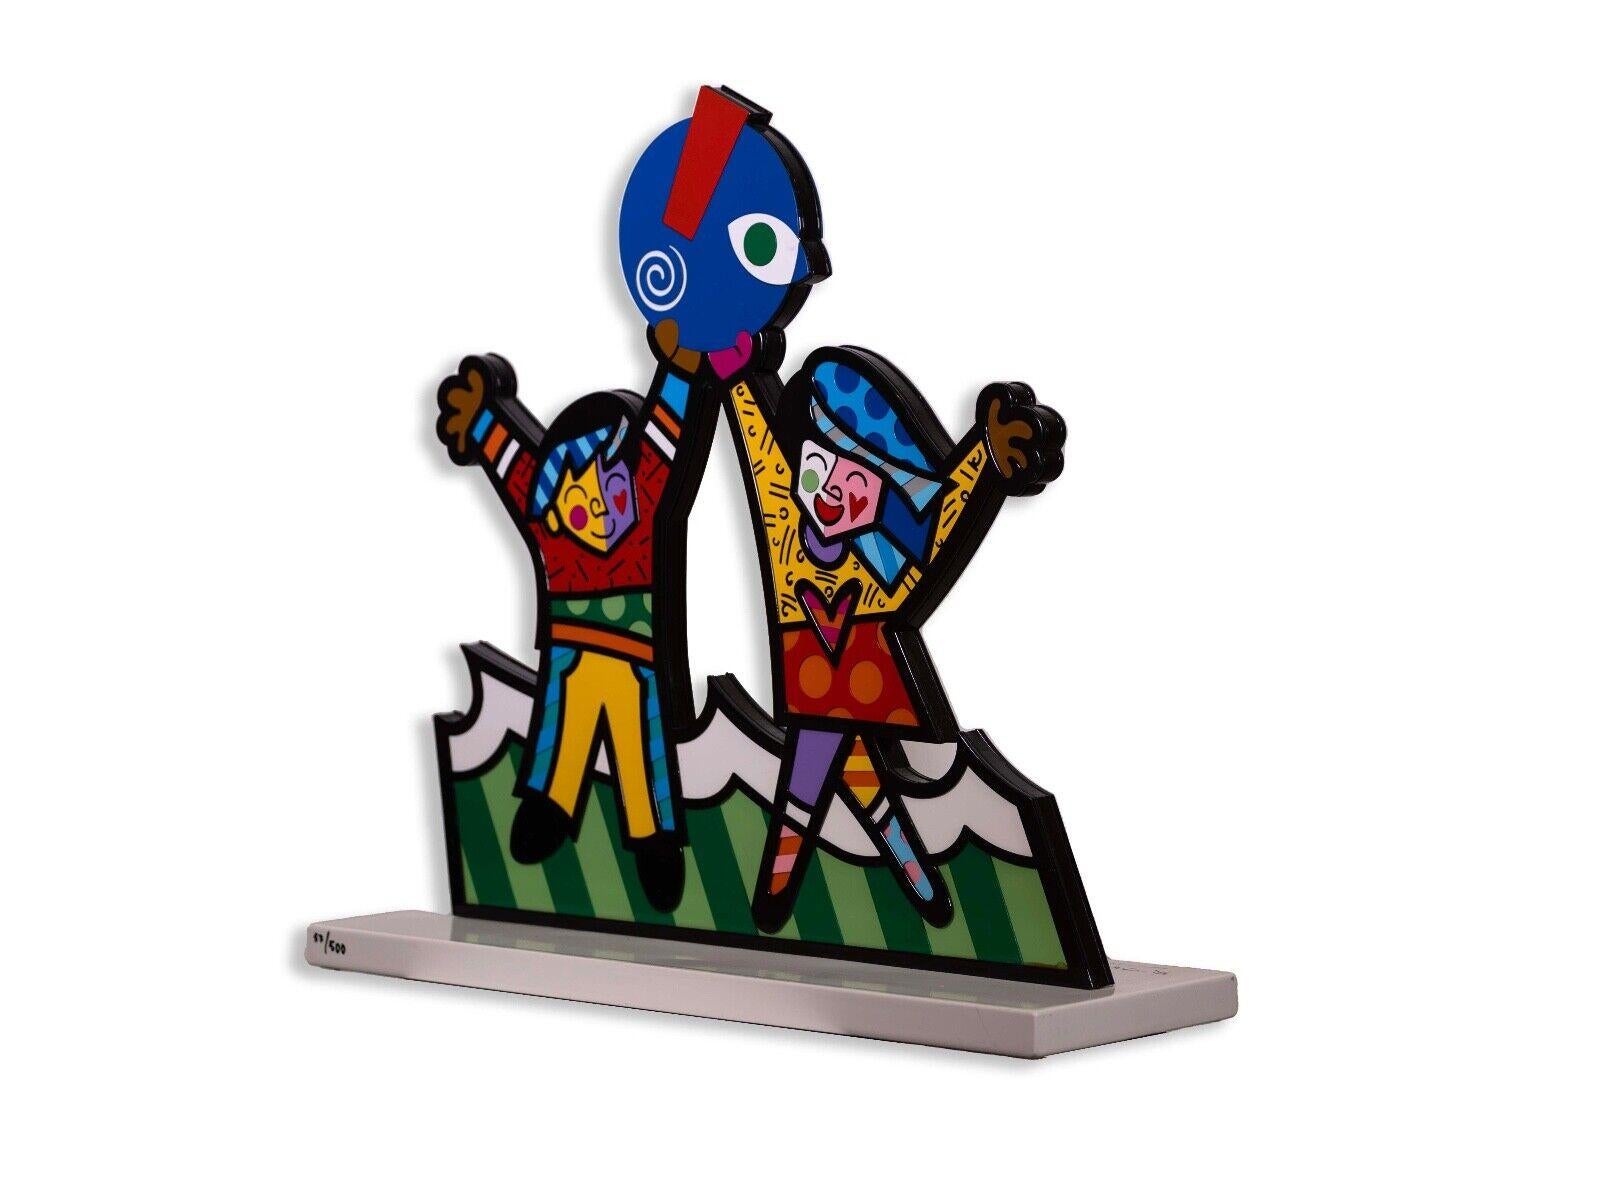 A joyful pop art, cubist, mixed-media sculpture by Miami artist Romero Britto. Created as a prototype for the Miami Children's Museum in 2006. Sculpture is hand signed on base with an annotation of 57/500. Romero Britto is known for many public